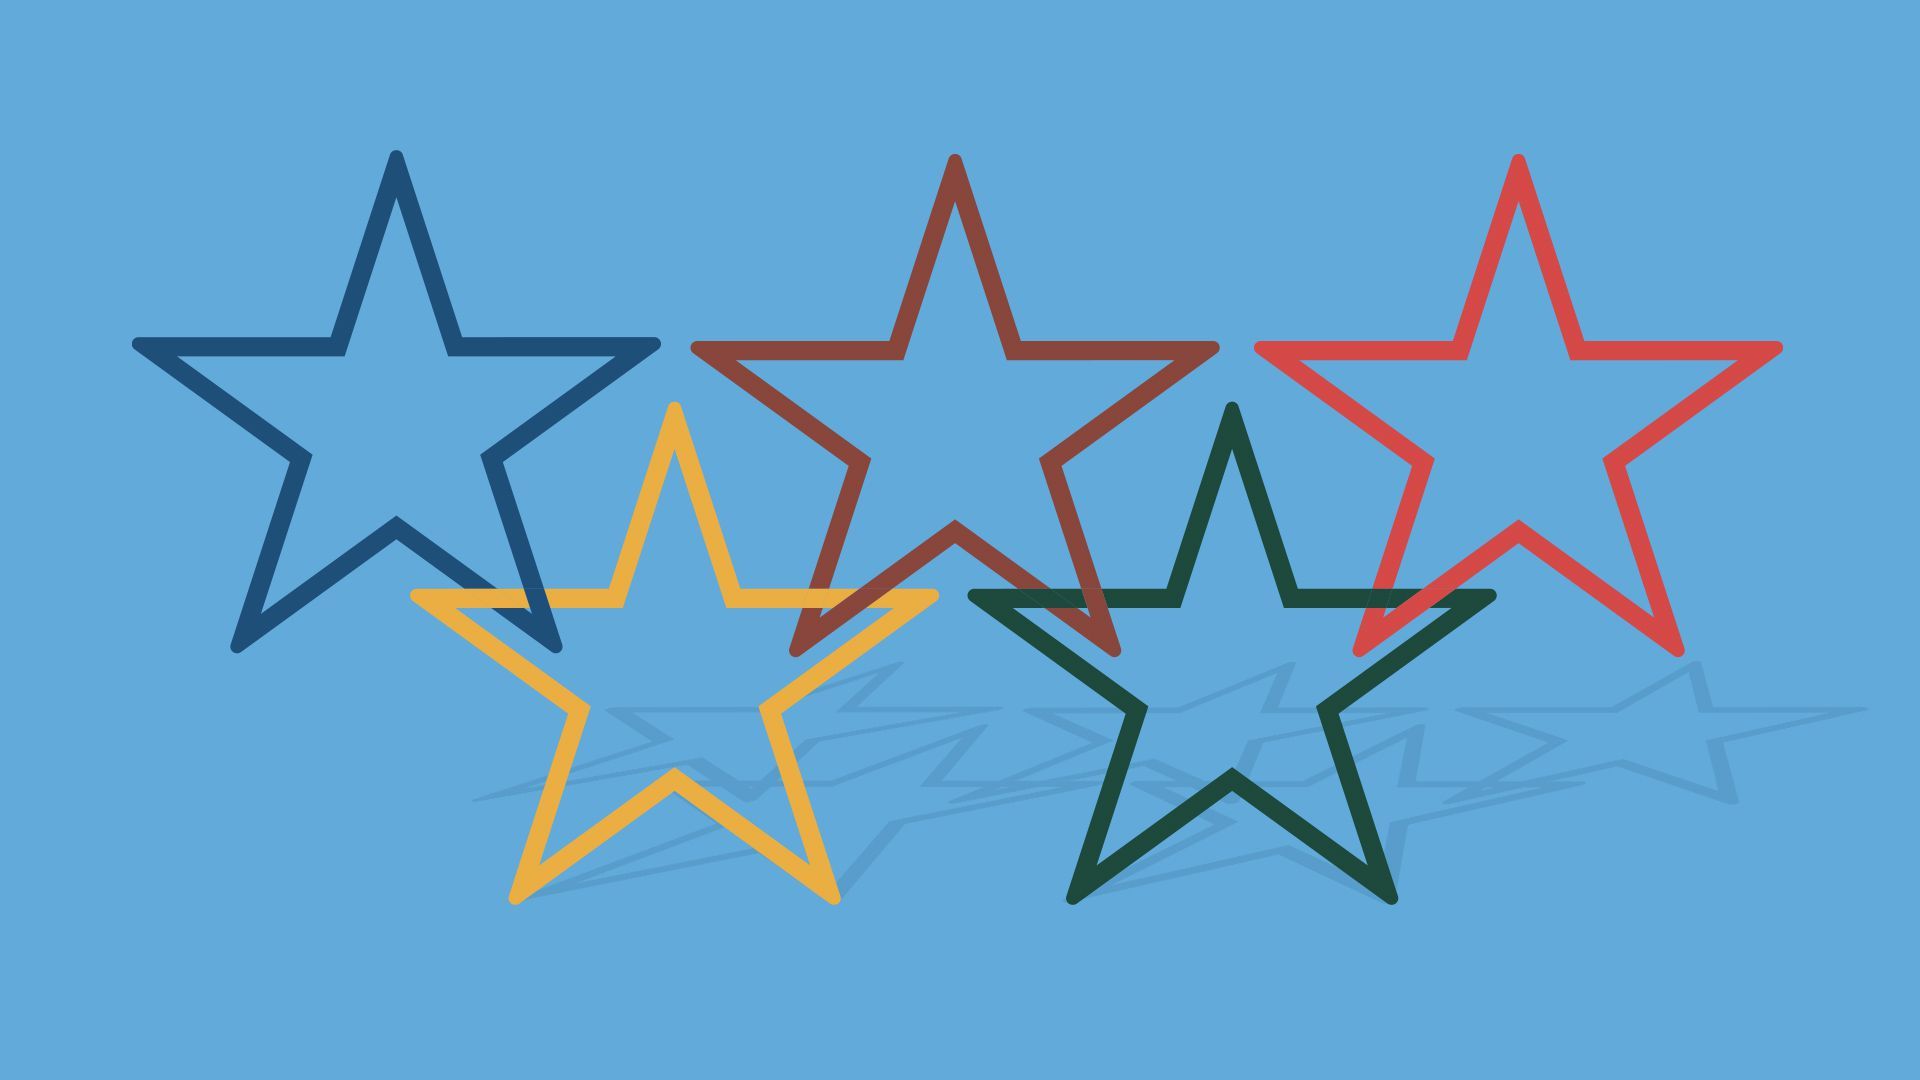 Illustration of the Olympic rings stylized as stars. 